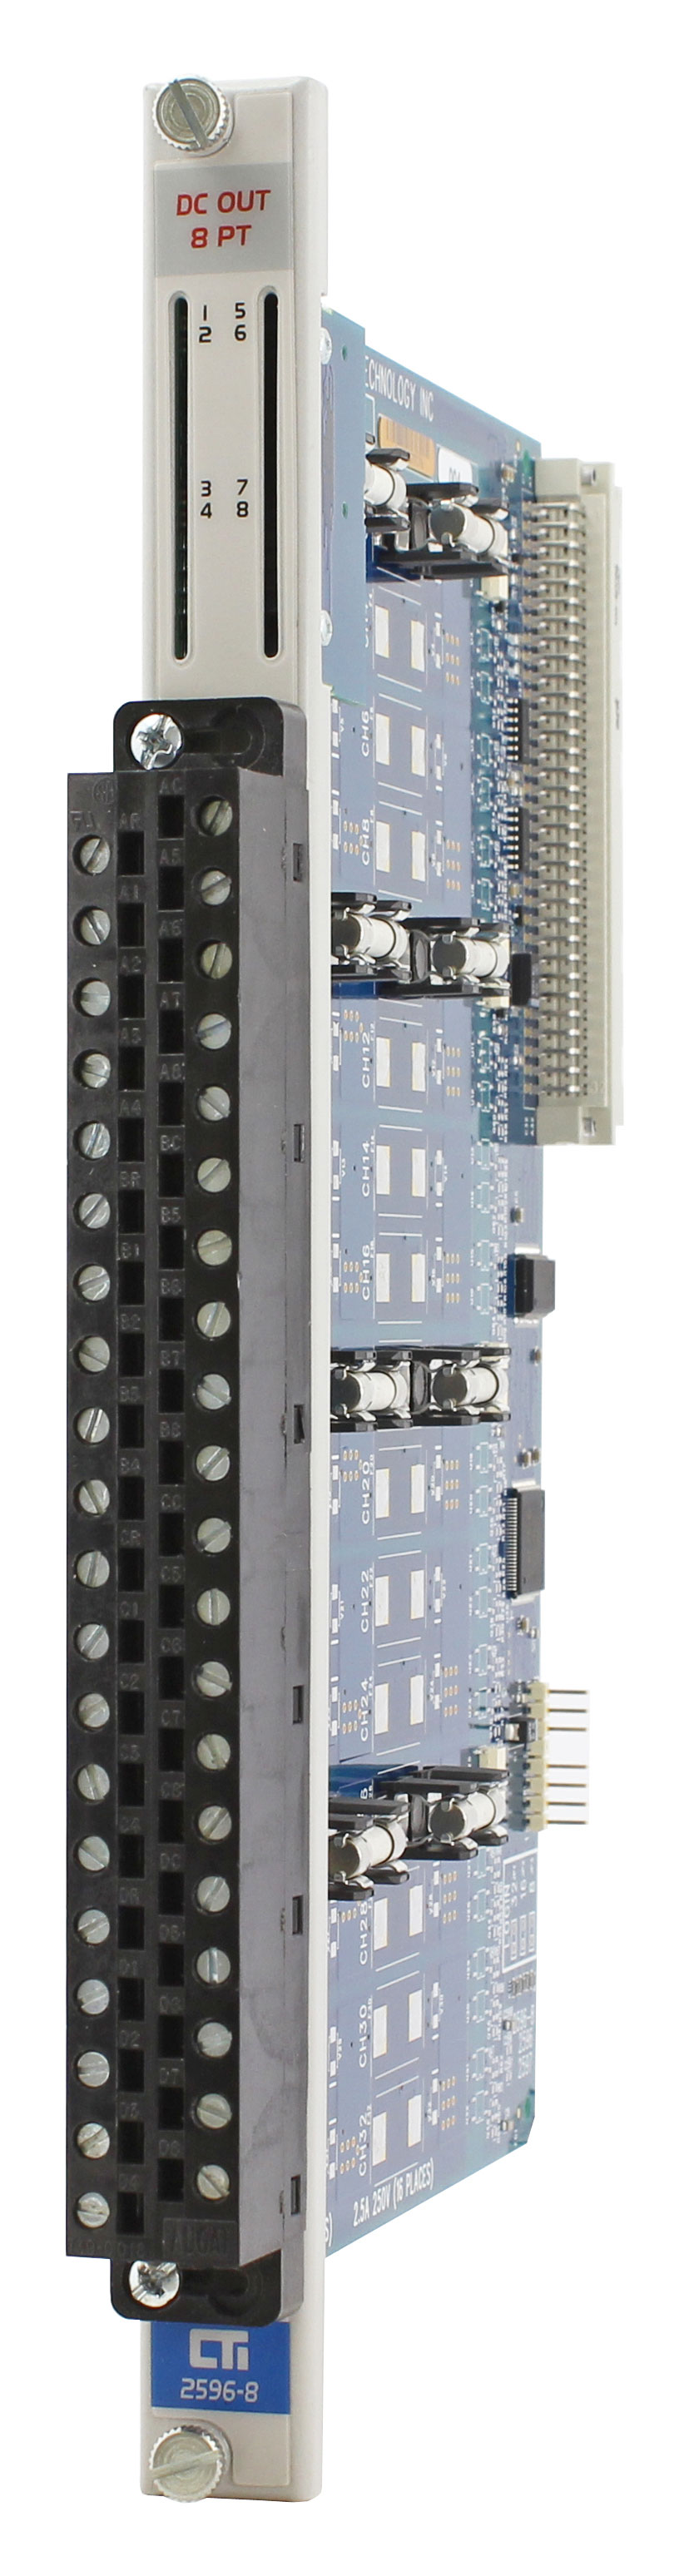 2596-8 8-Point DC Output Module (MATURED - replaced by 2596)